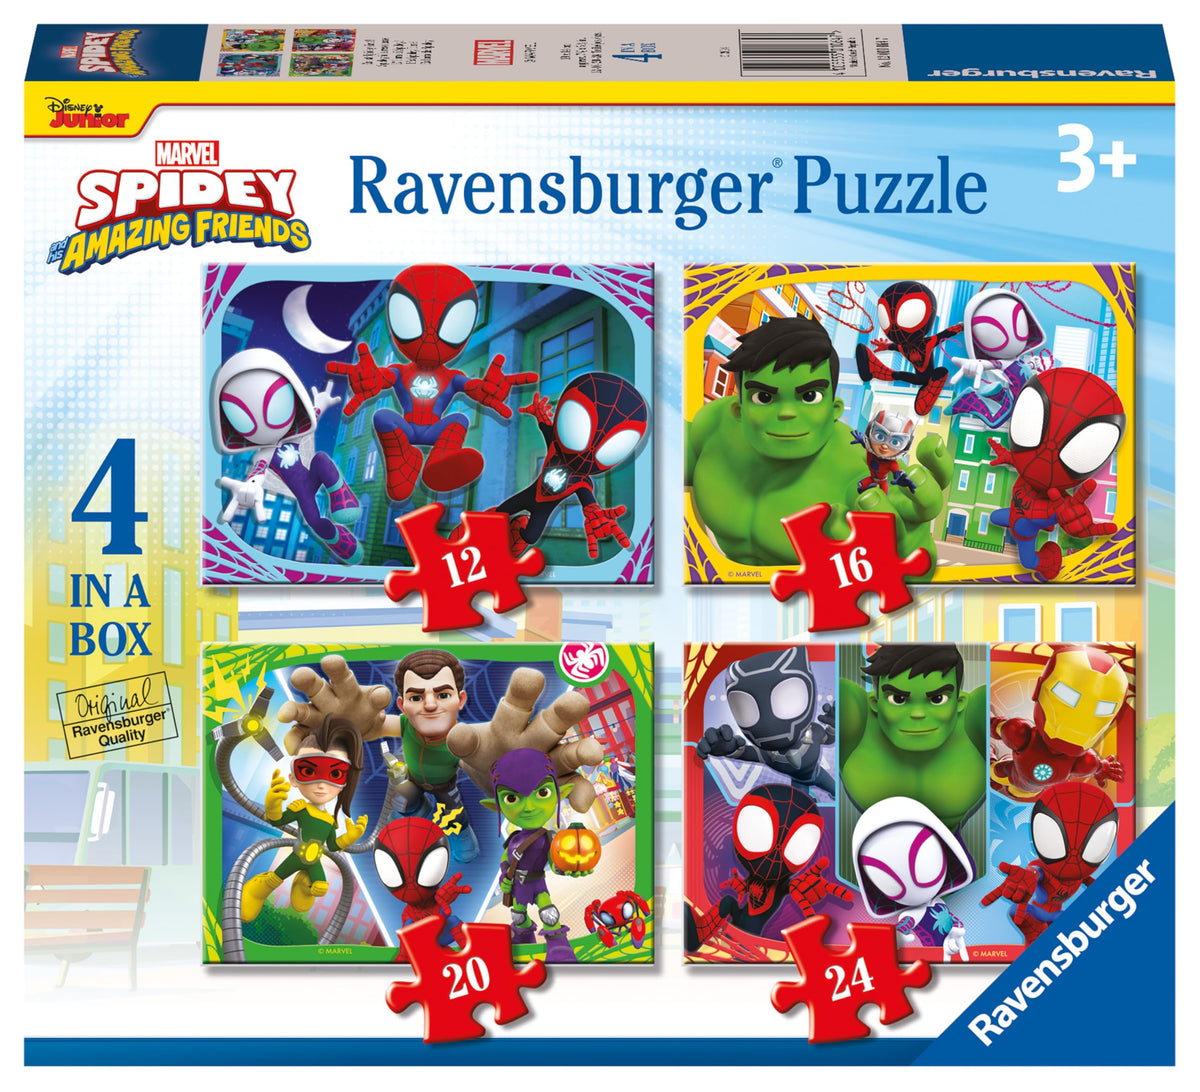 Ravensburger Marvel Spidey & His Amazing Friends Spiderman Jigsaw Puzzles for Kids Age 3 Years Up - 4 in a Box (12, 16, 20, 24 Pieces)